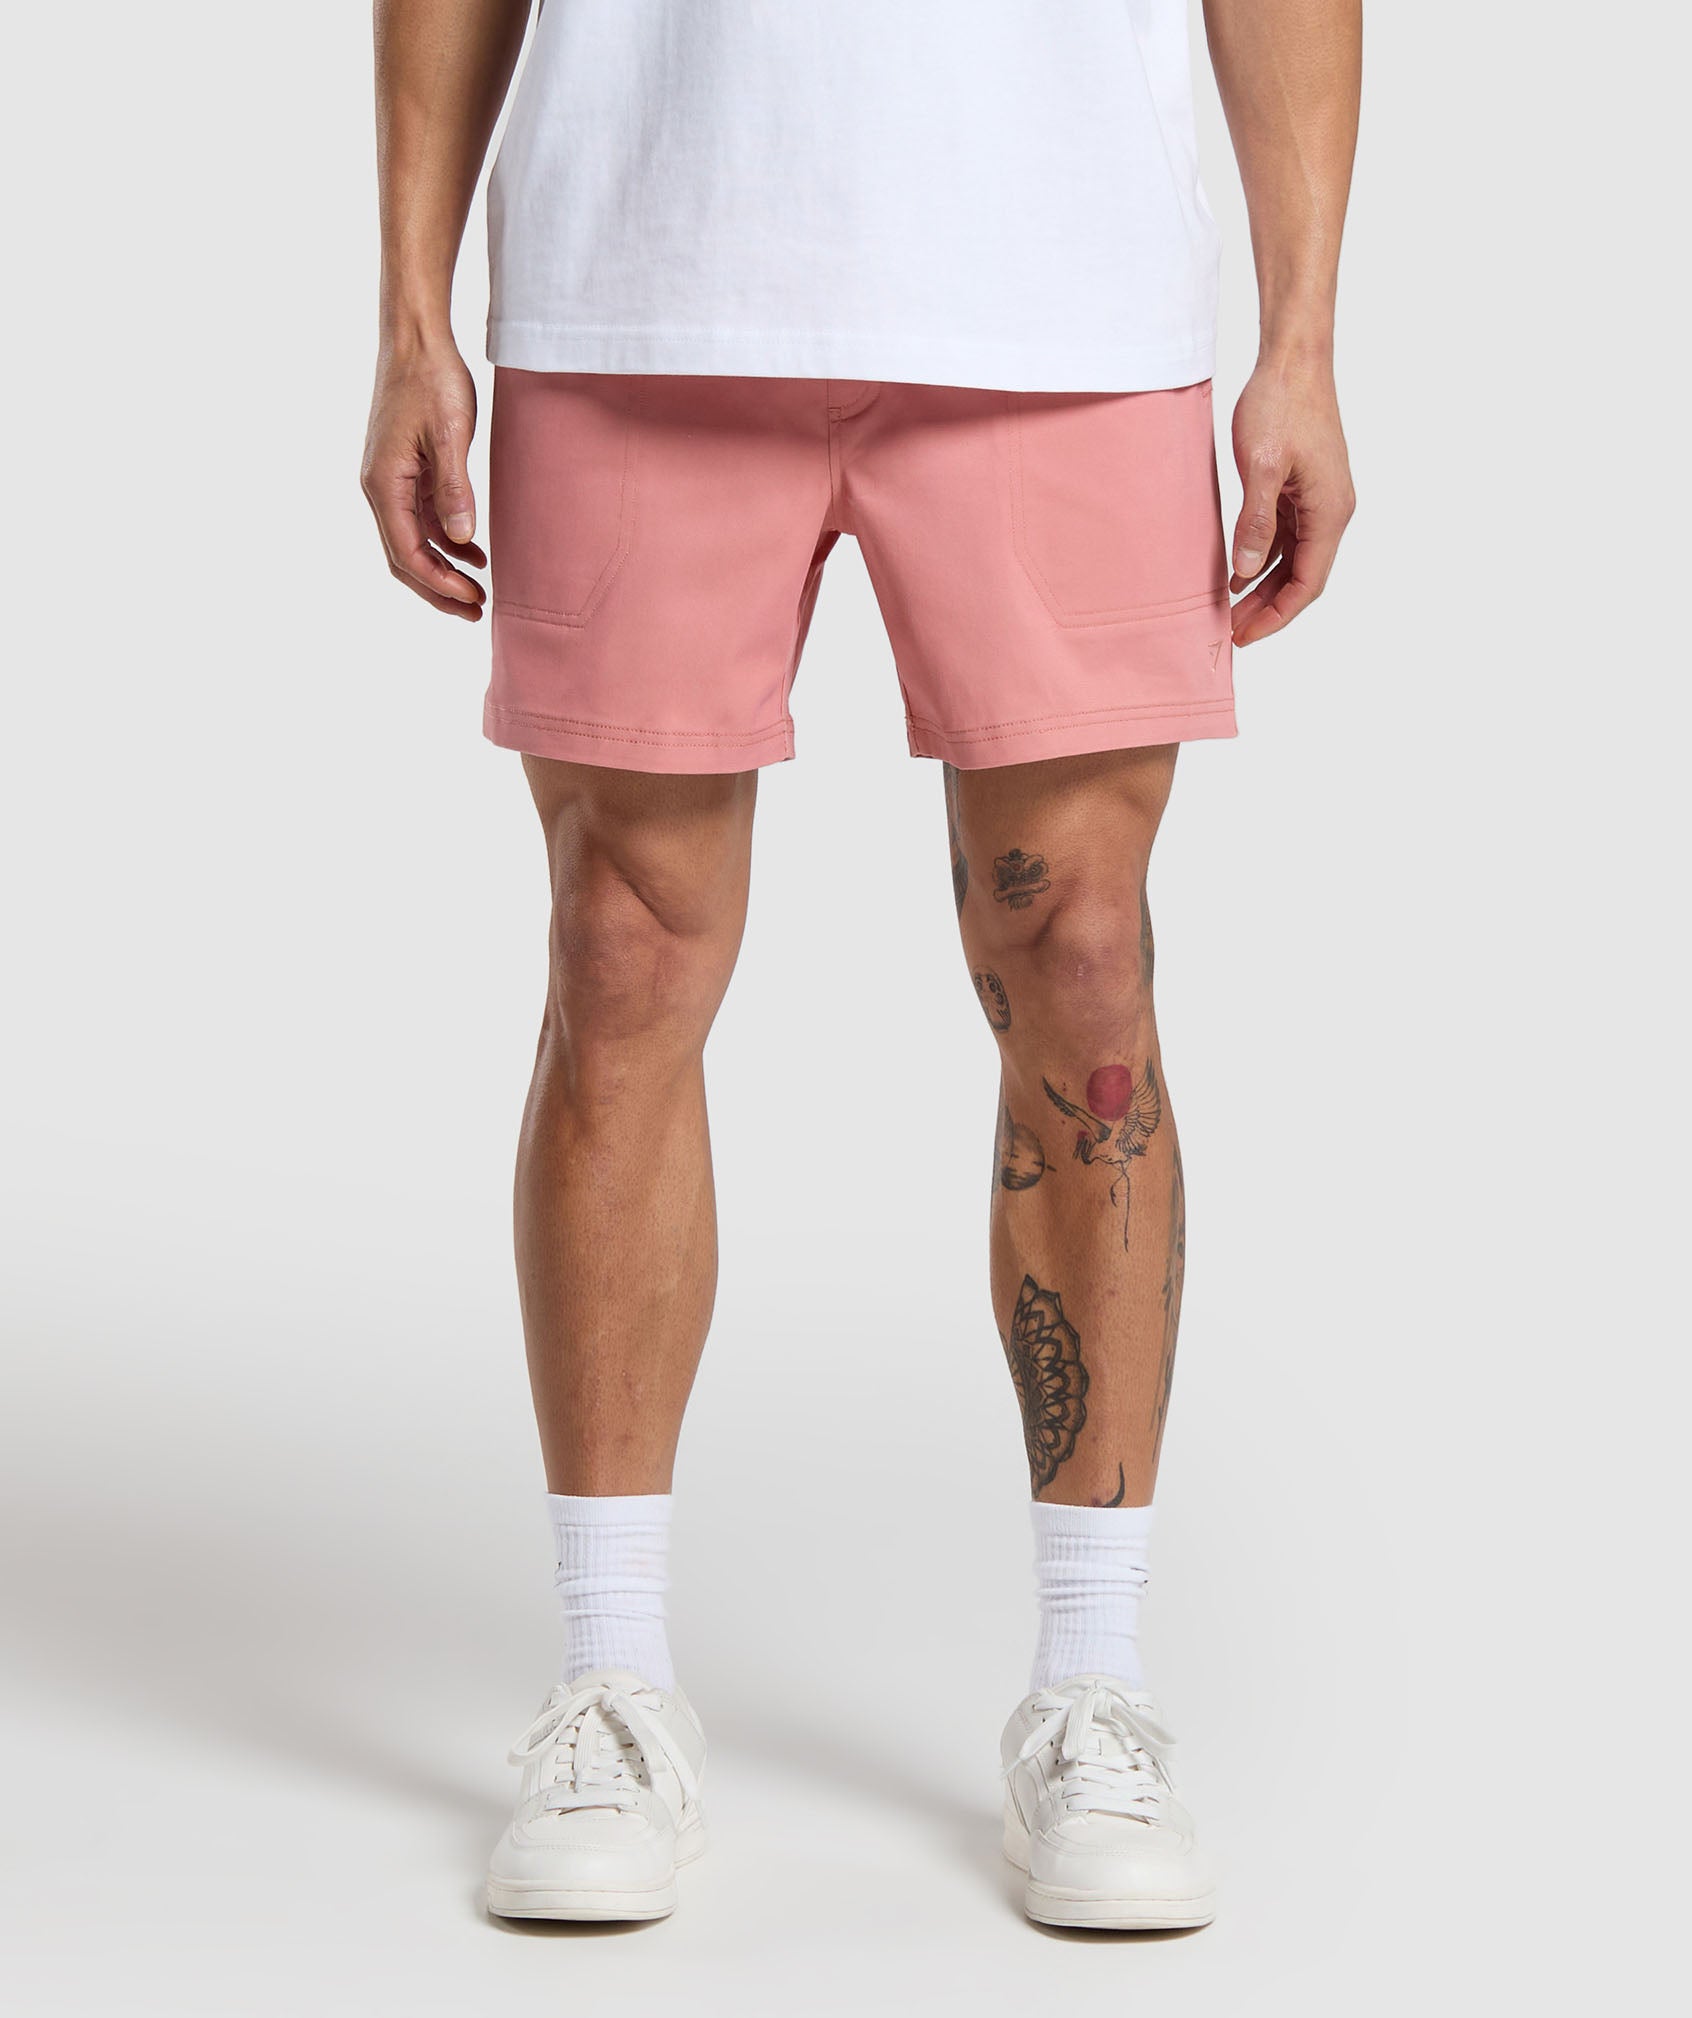 Rest Day Woven Shorts in Classic Pink - view 1